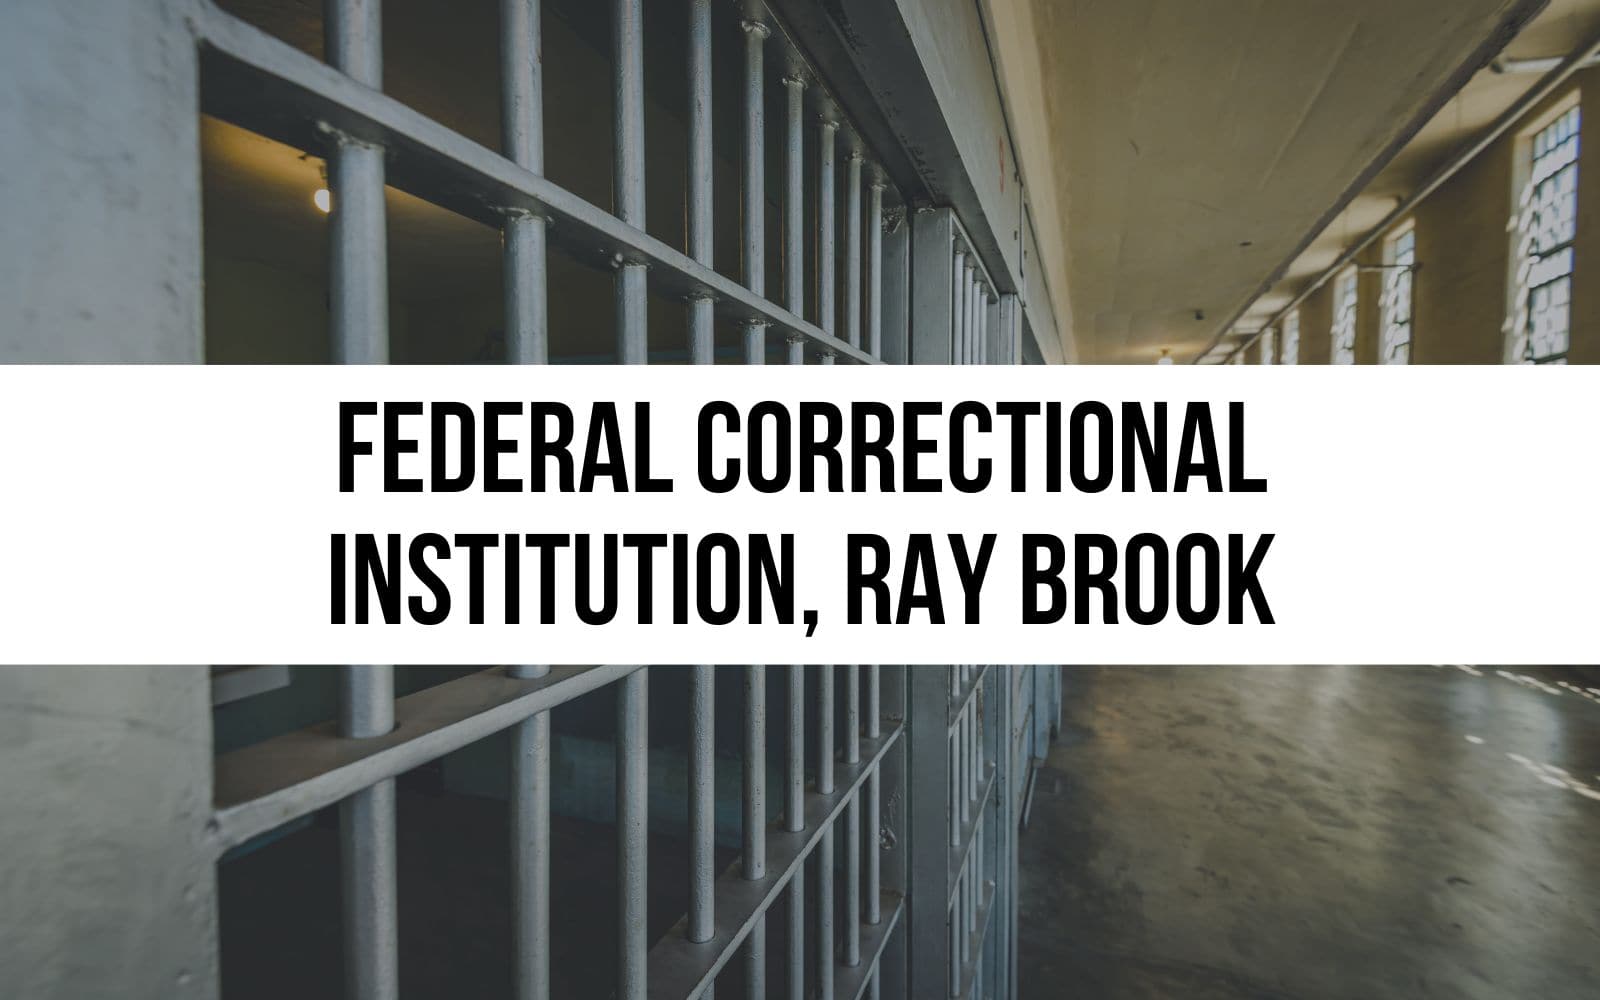 Federal Correctional Institution, Ray Brook